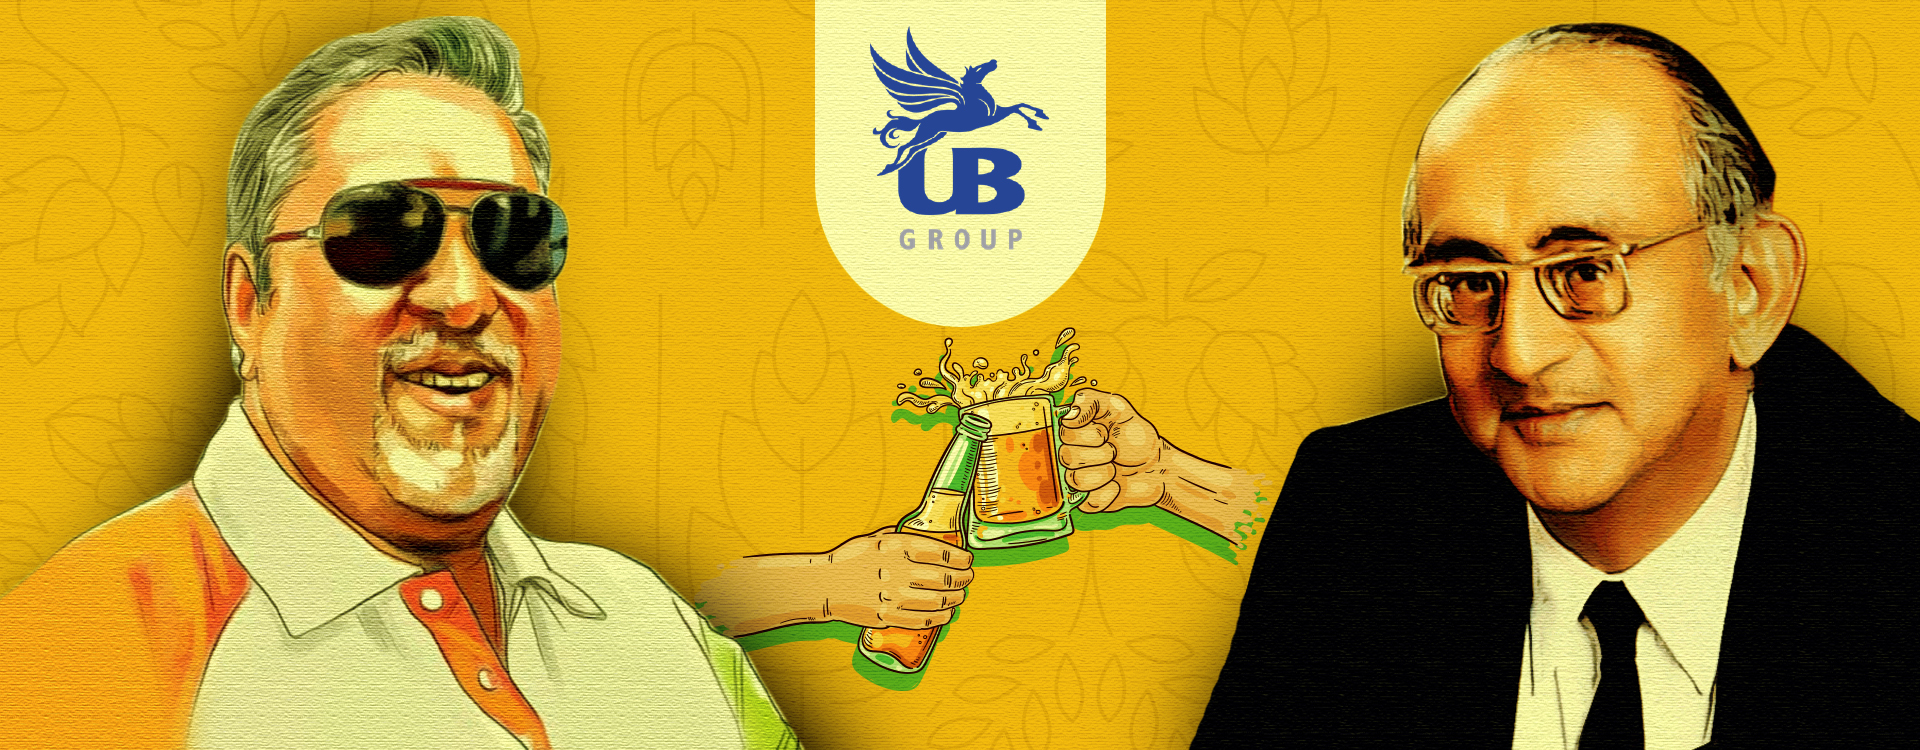 United Breweries is India's Largest Producer of Beer